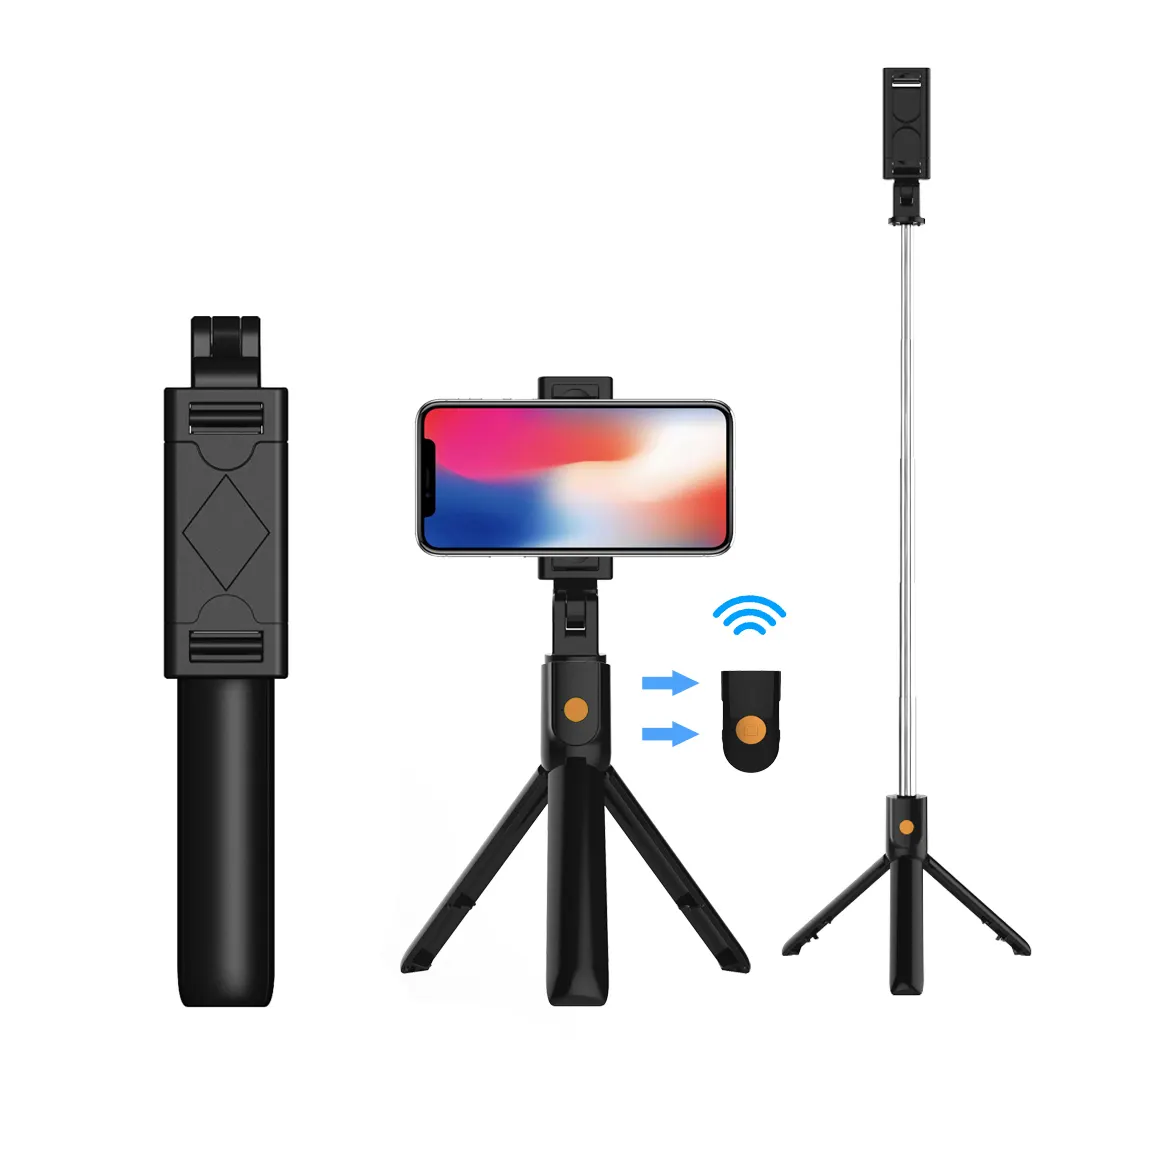 Hot Sale 3 in 1 Multifunctional Wireless Flexible Selfie Stick Tripod With Wireless Remote For Cell Phone Camera